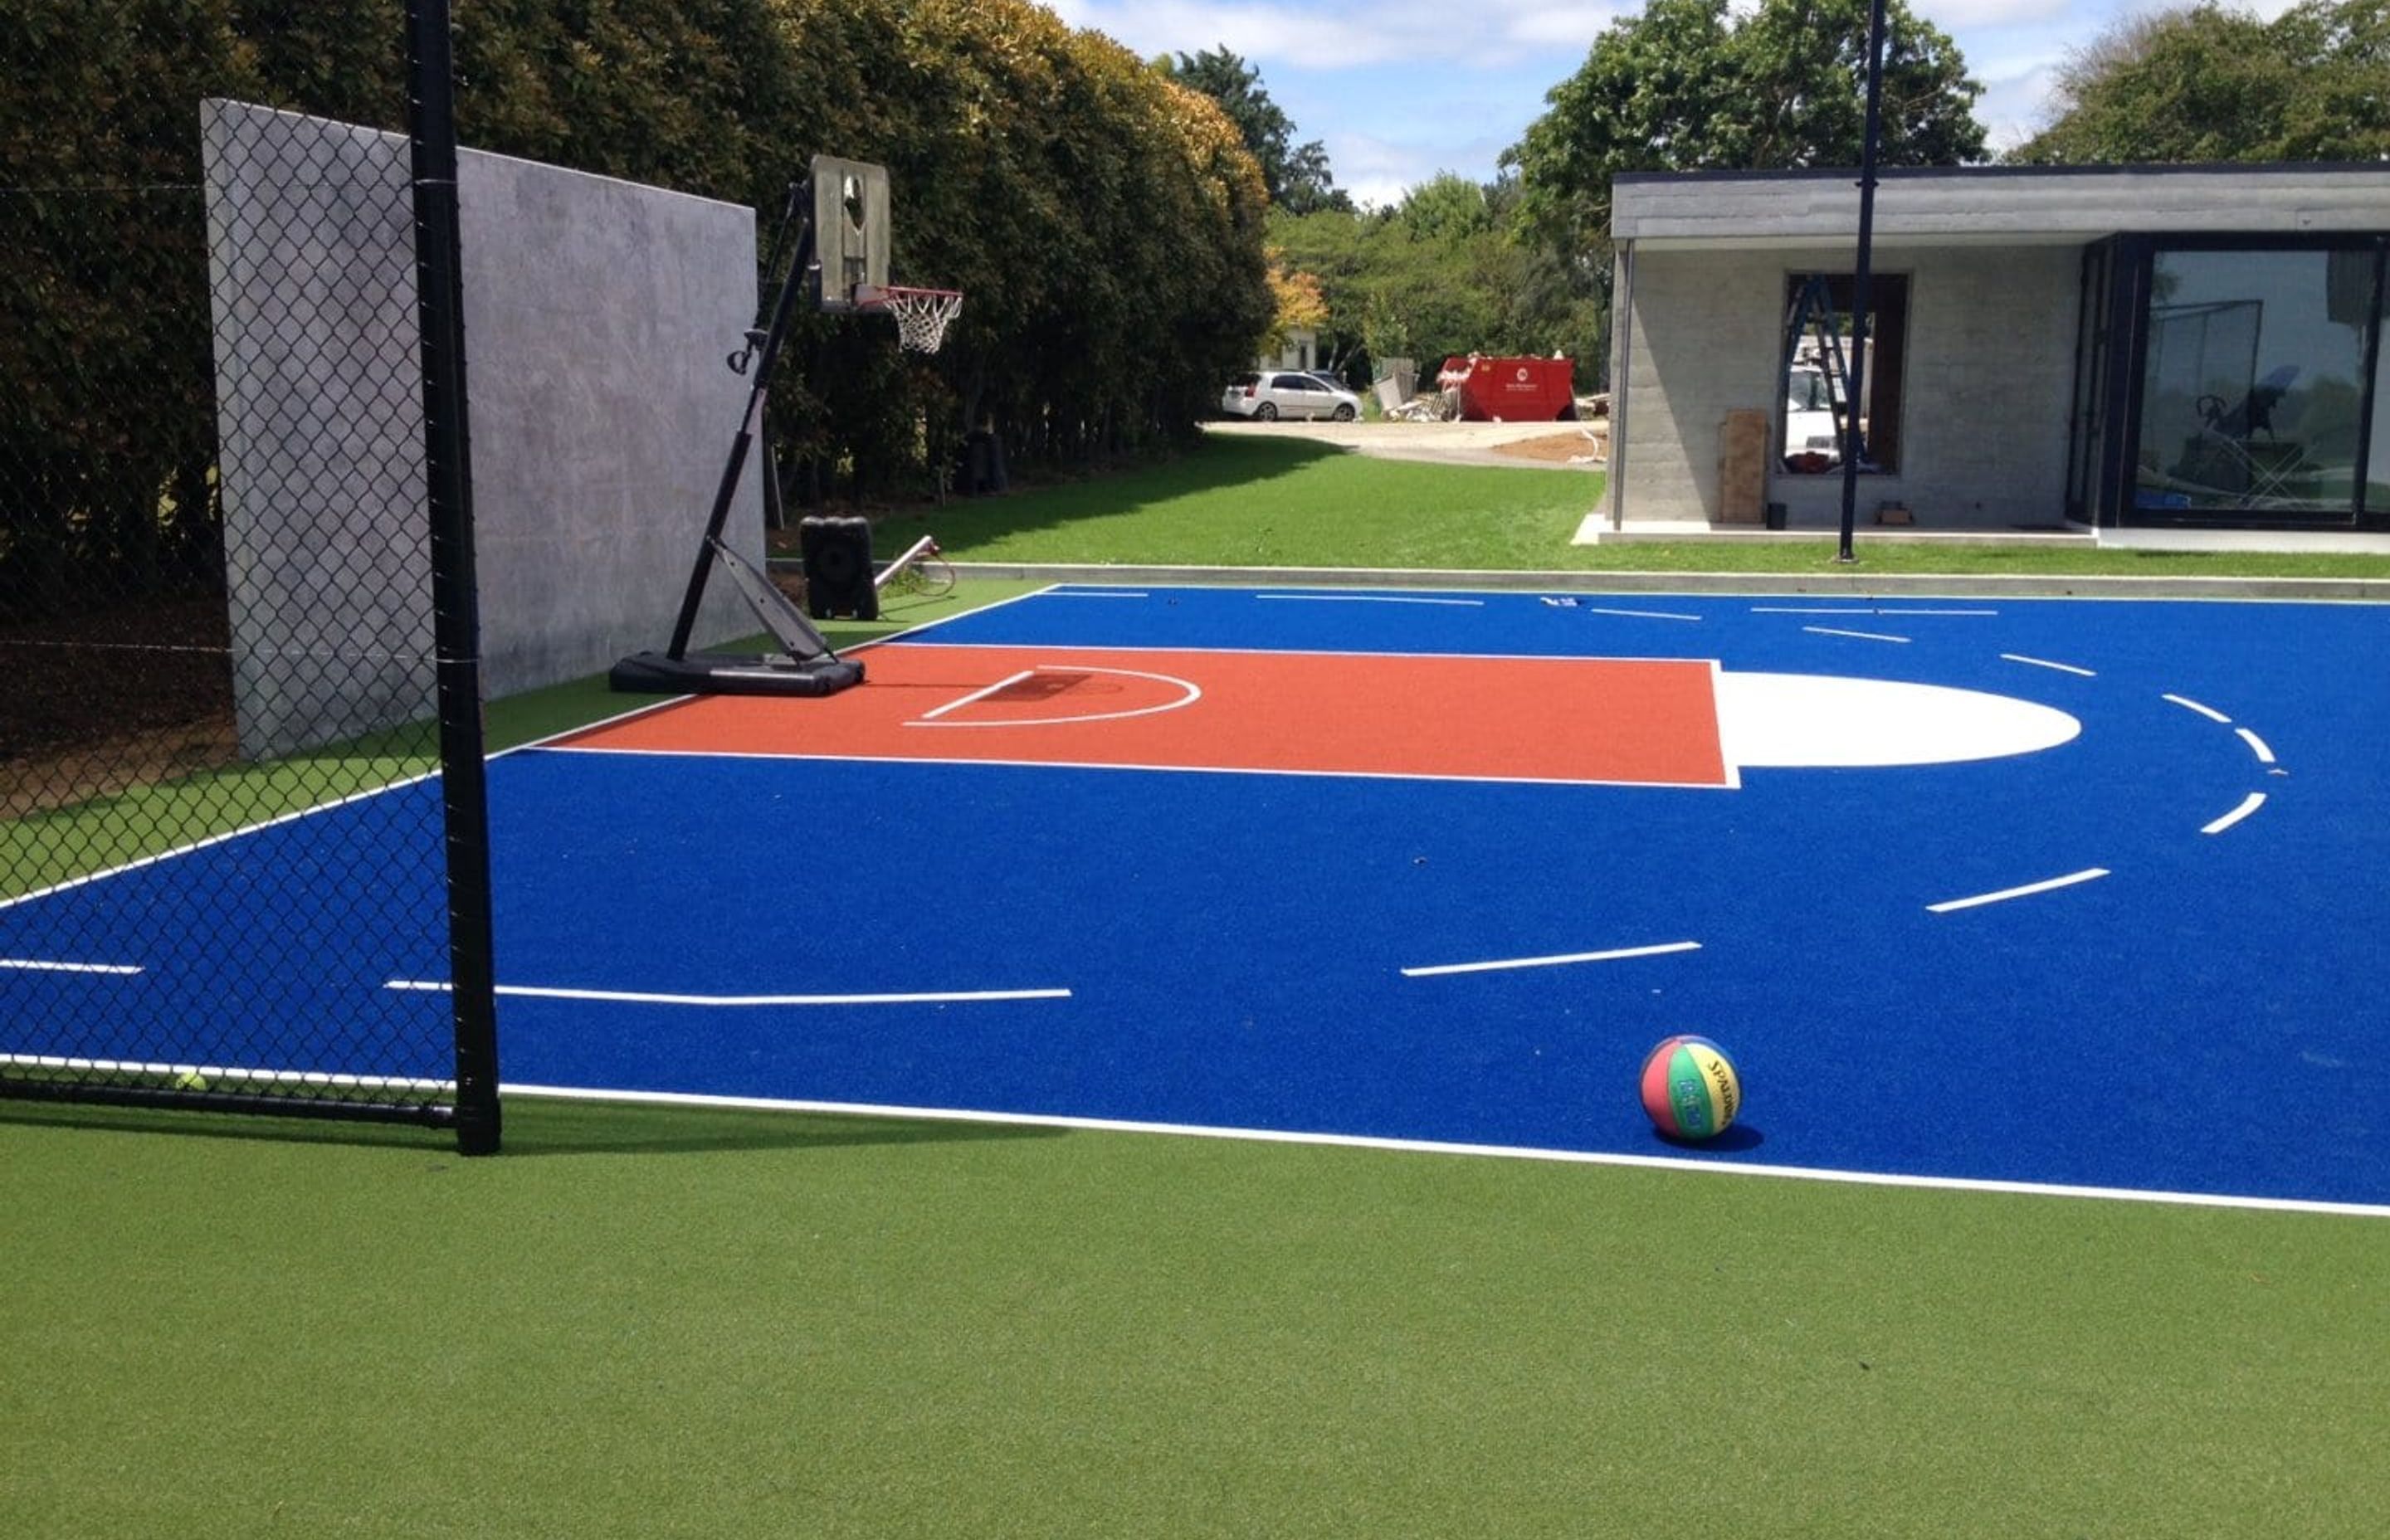 Multiplay court is perfect for Sports Mad Families